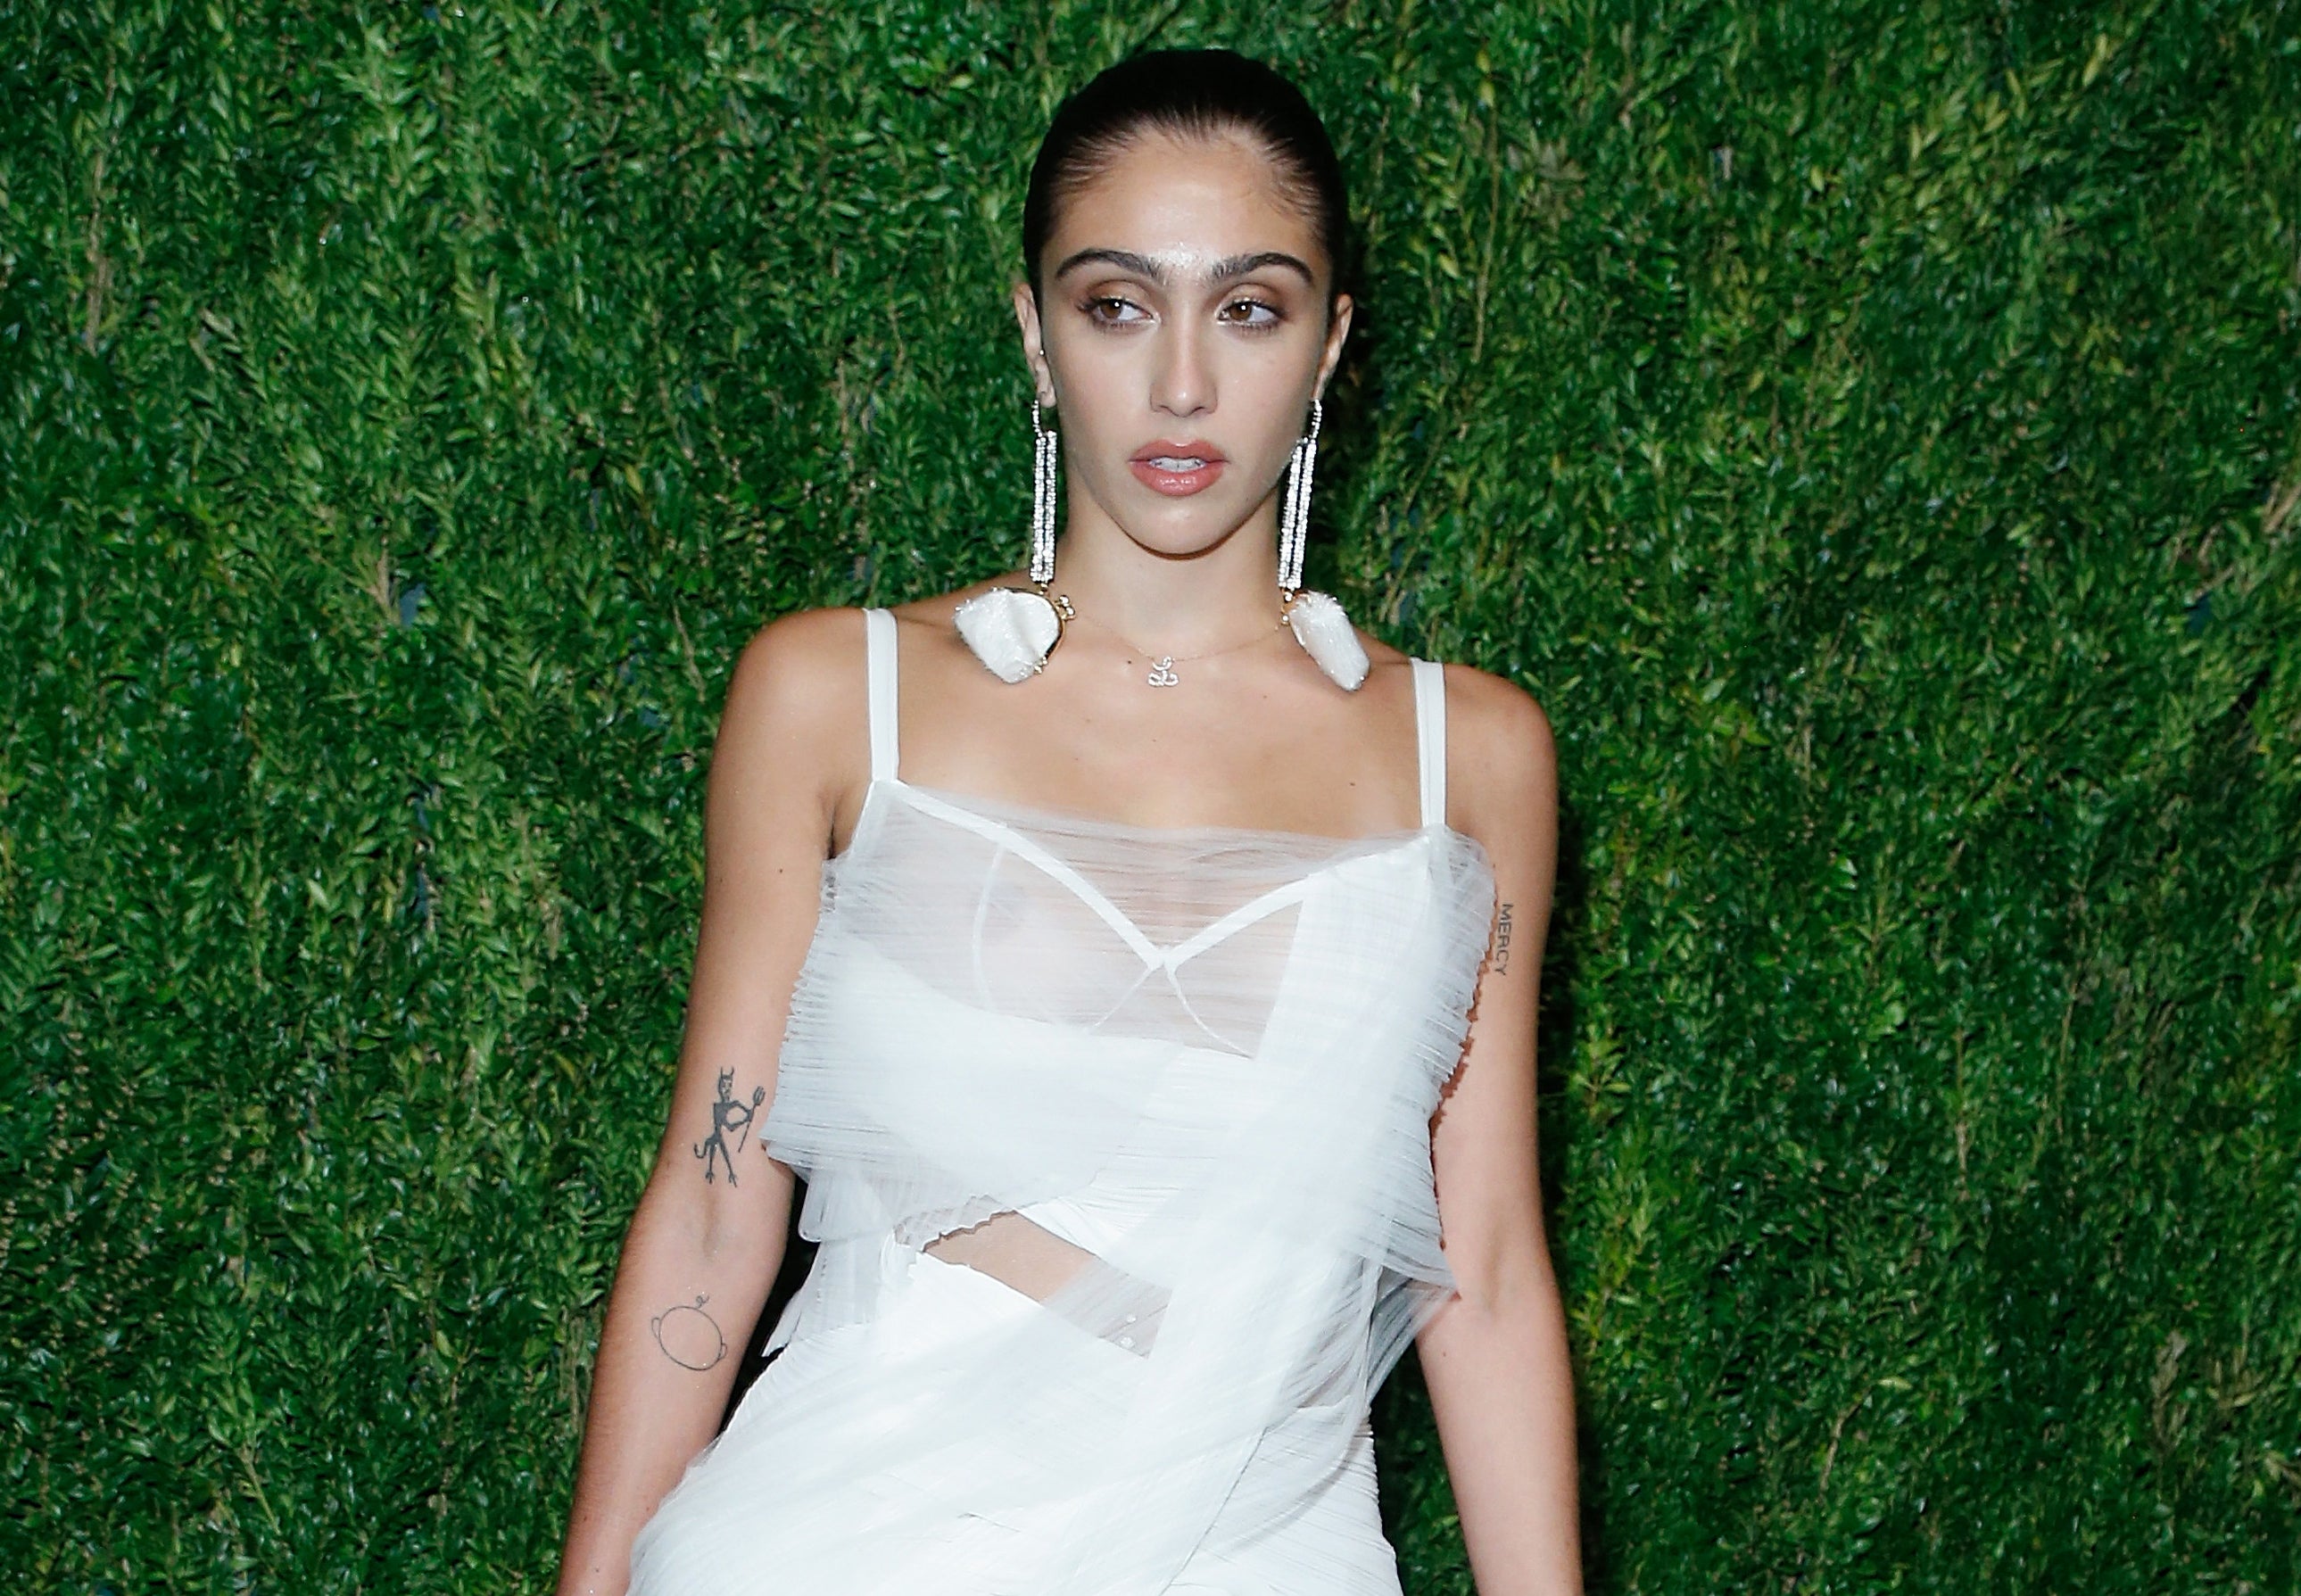 Lourdes wears a white dress while on a red carpet 